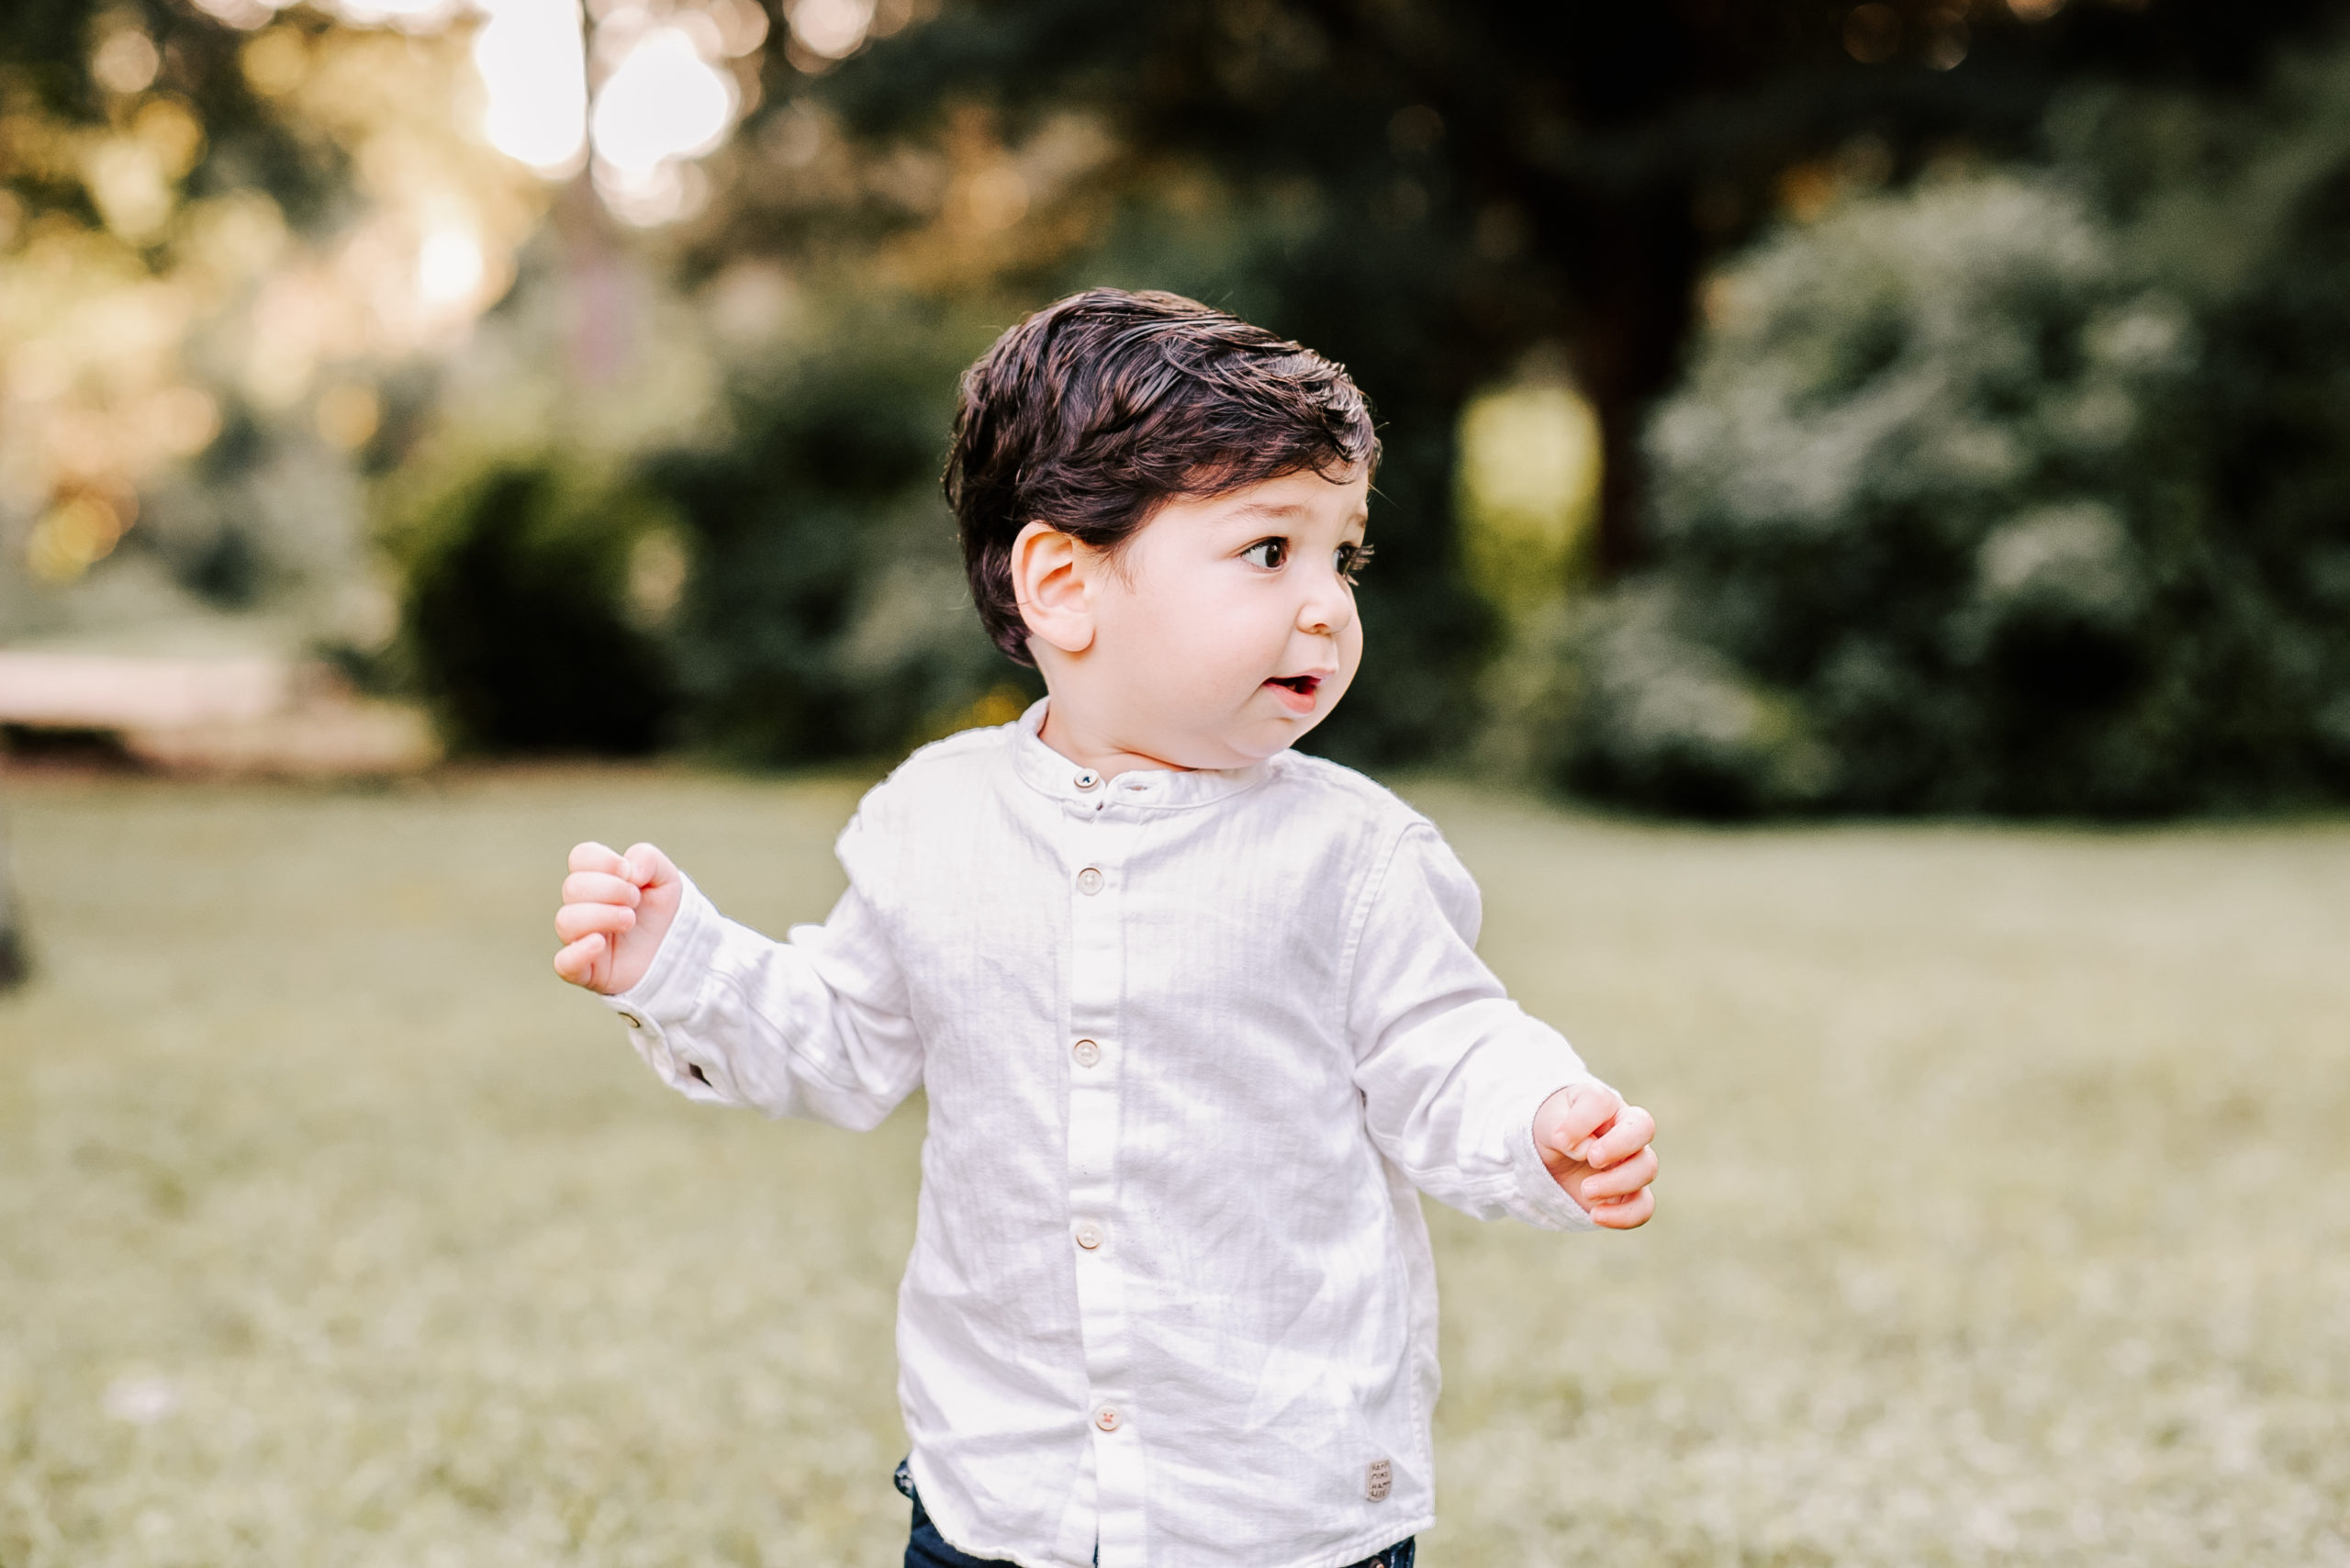 A young toddler boy in a white button down shirt plays in a park at sunset shutterbug boutique